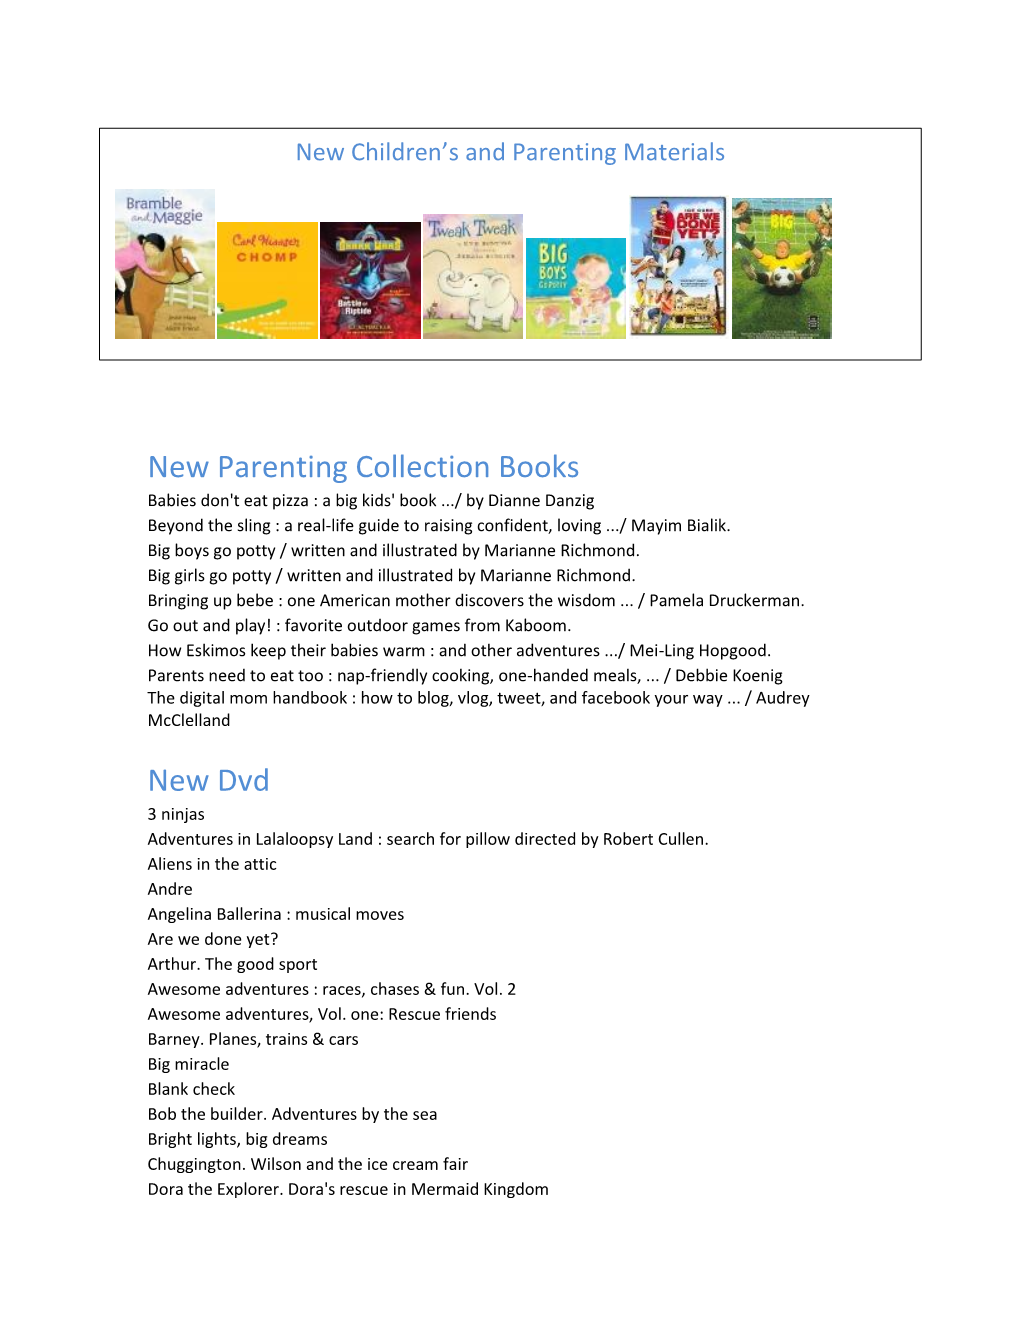 New Parenting Collection Books New